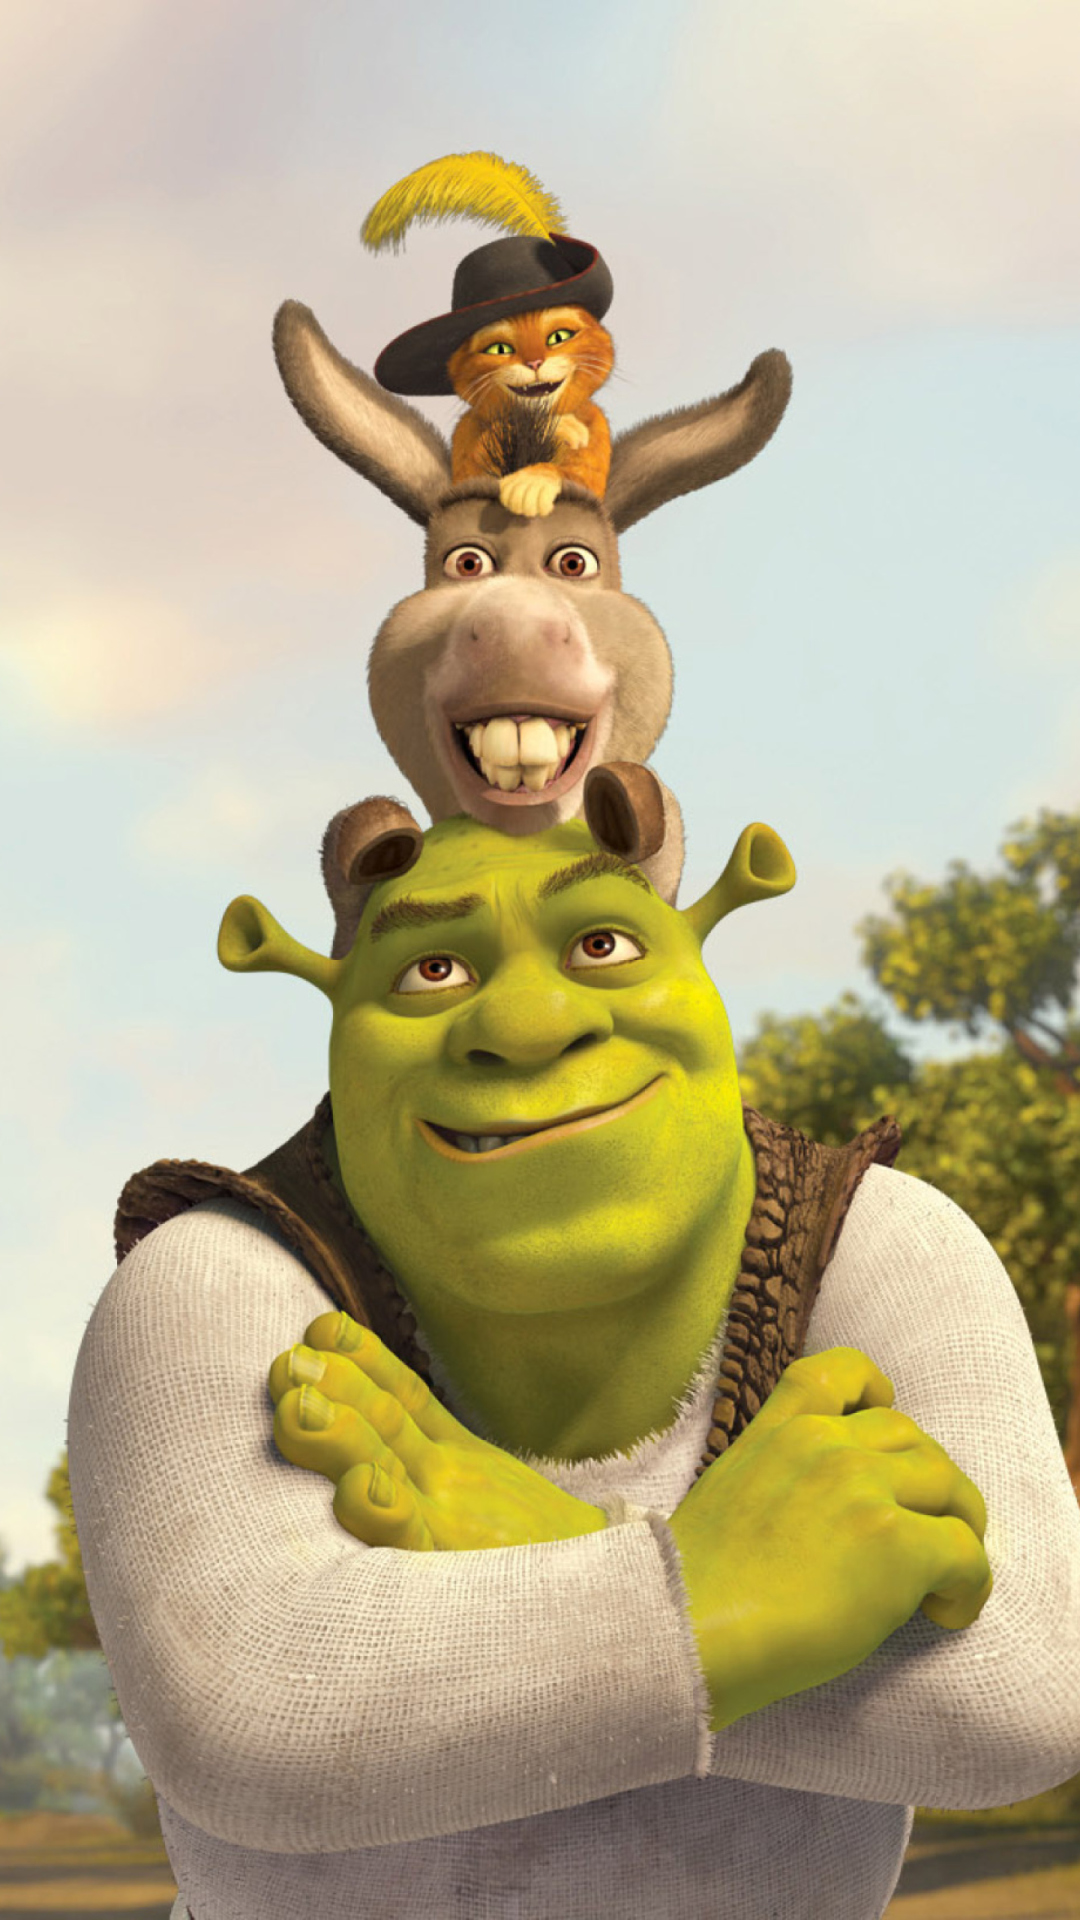 Shrek Donkey Puss In Boots Wallpaper for iPhone 6 Plus